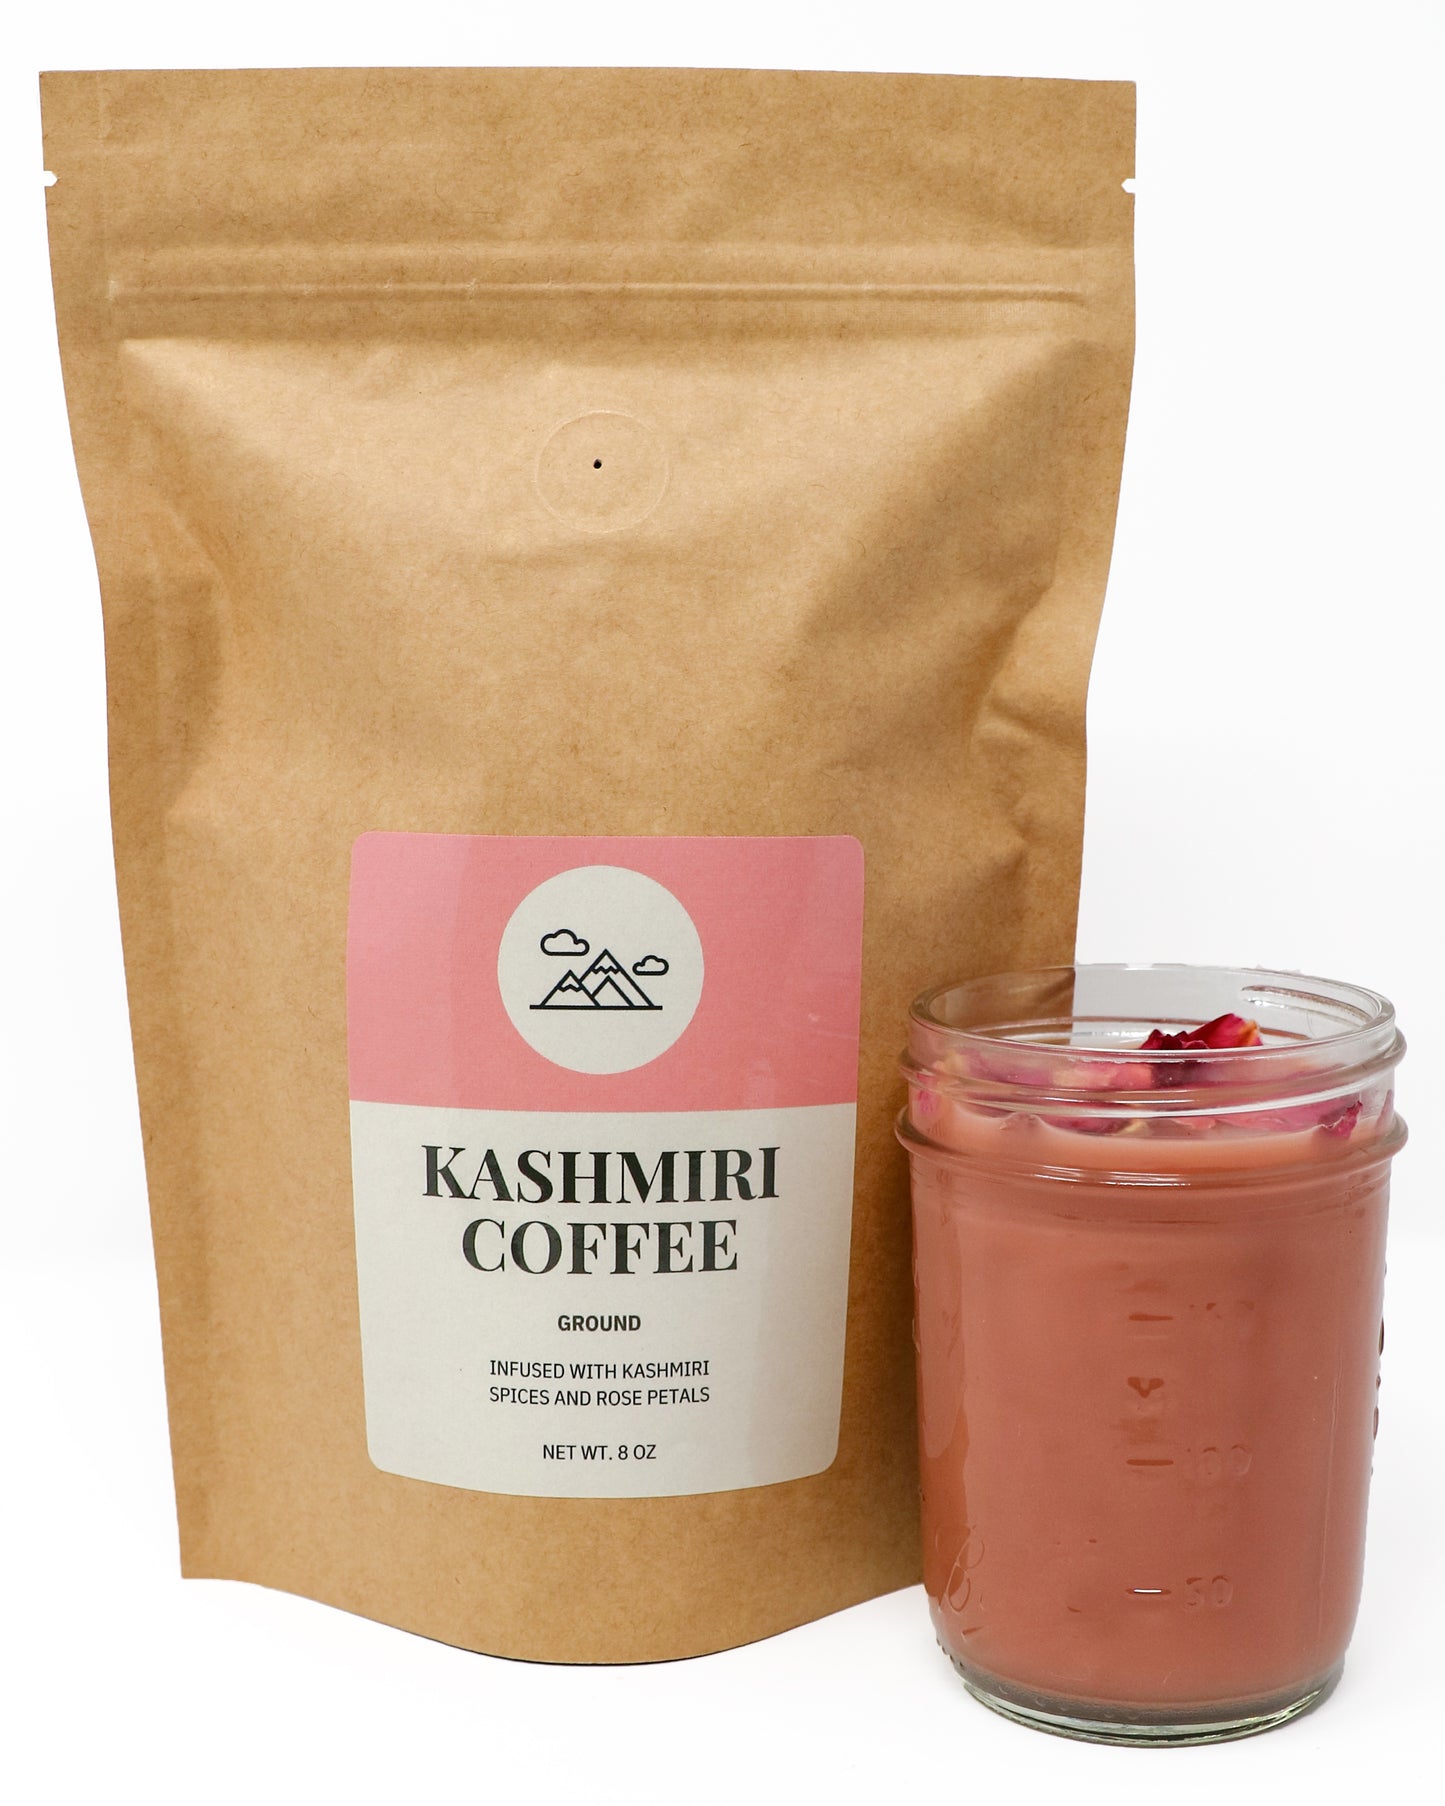 Himalayan  Pink Kashmiri Coffee infused with chai spices: cardamom, rose petals, cinnamon, and more